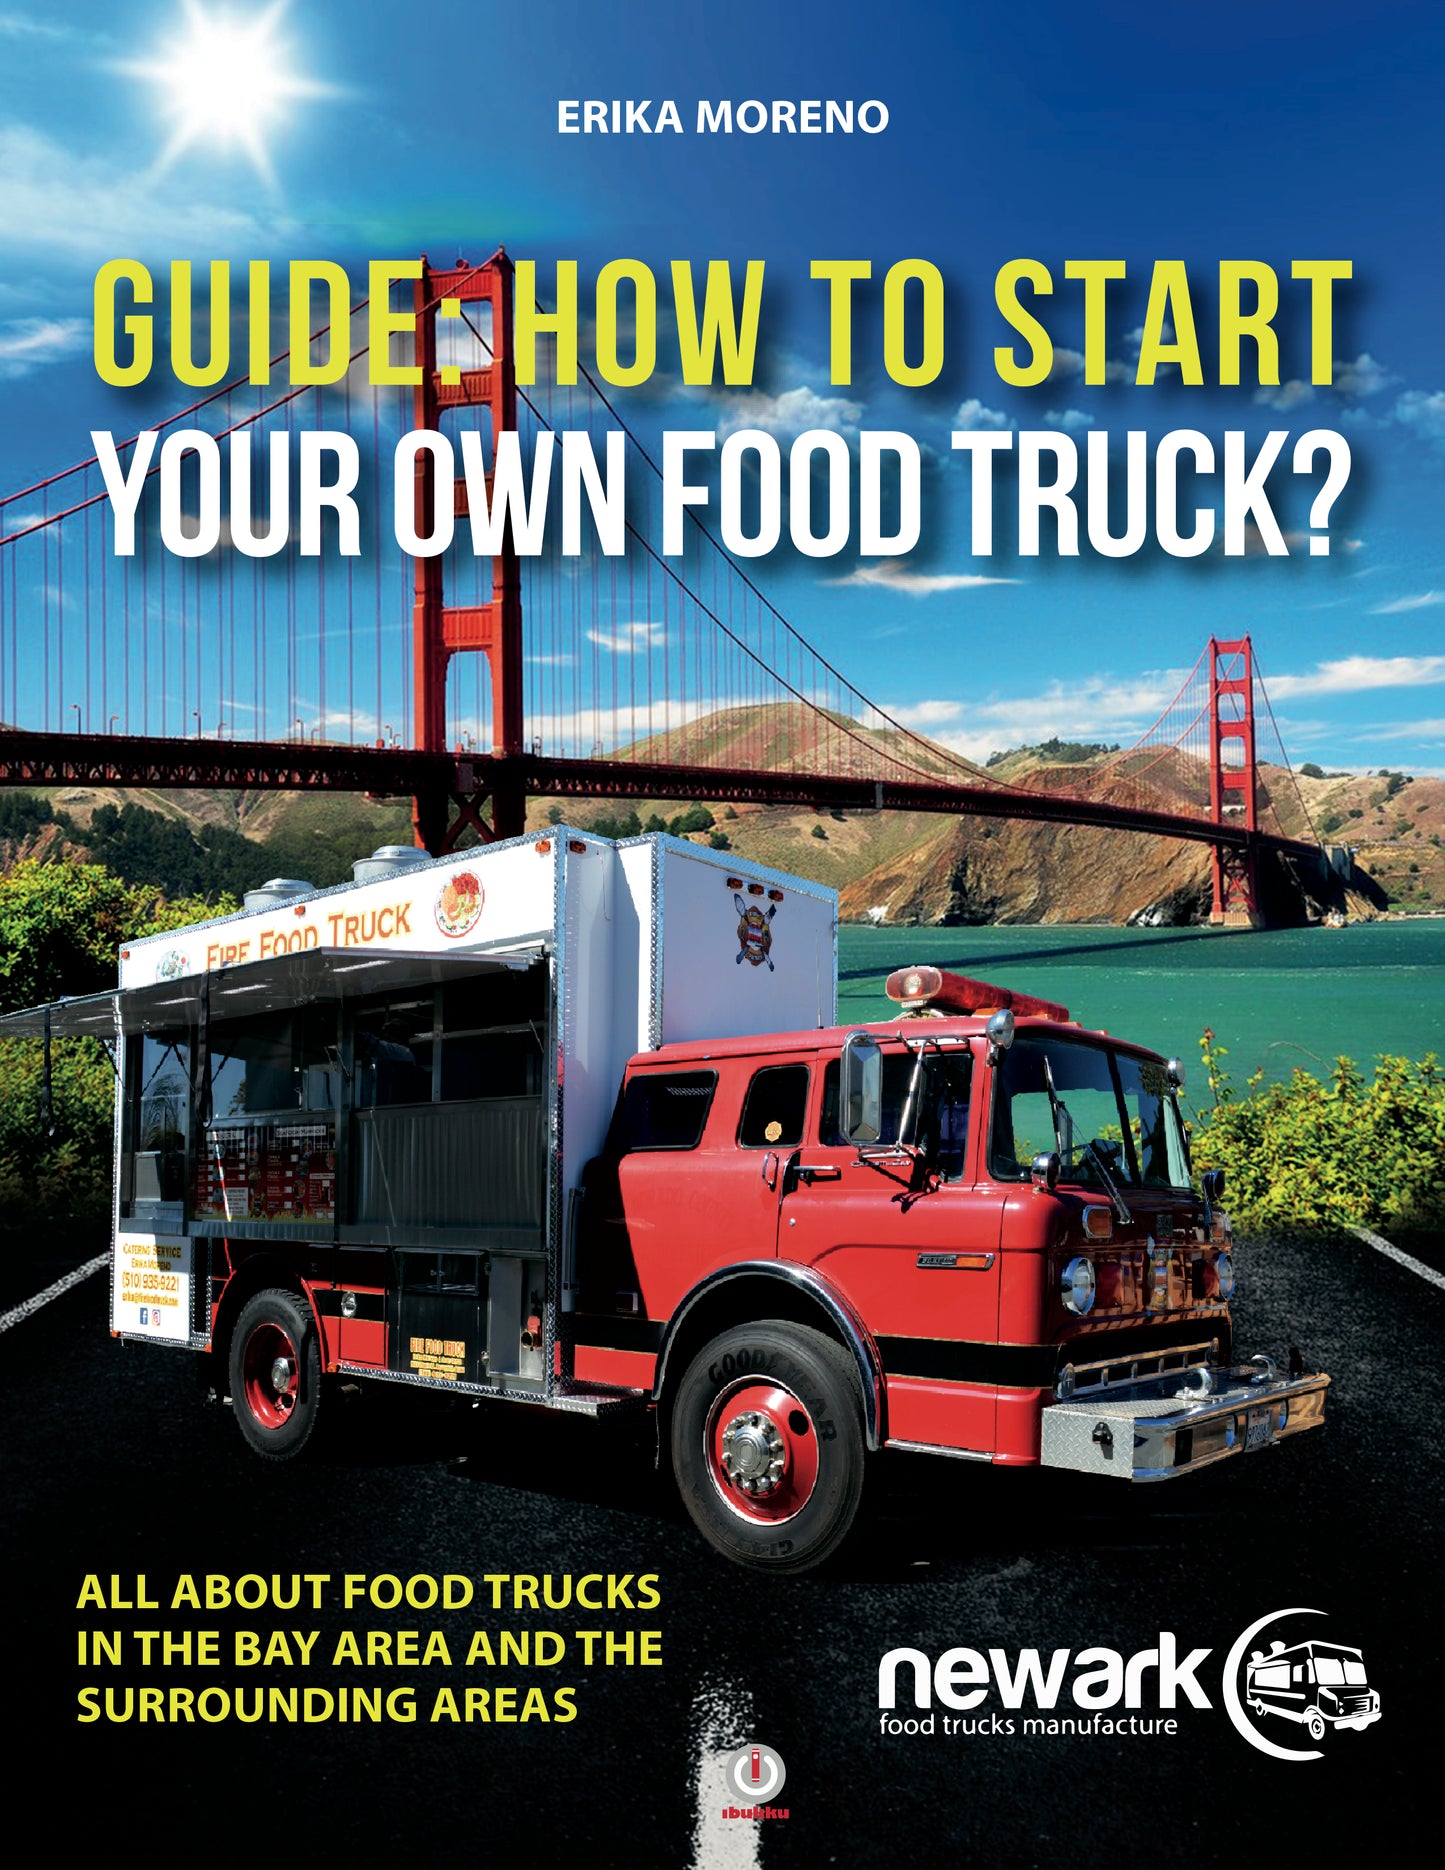 Guide How To Start Your Own Food Truck (Printed)